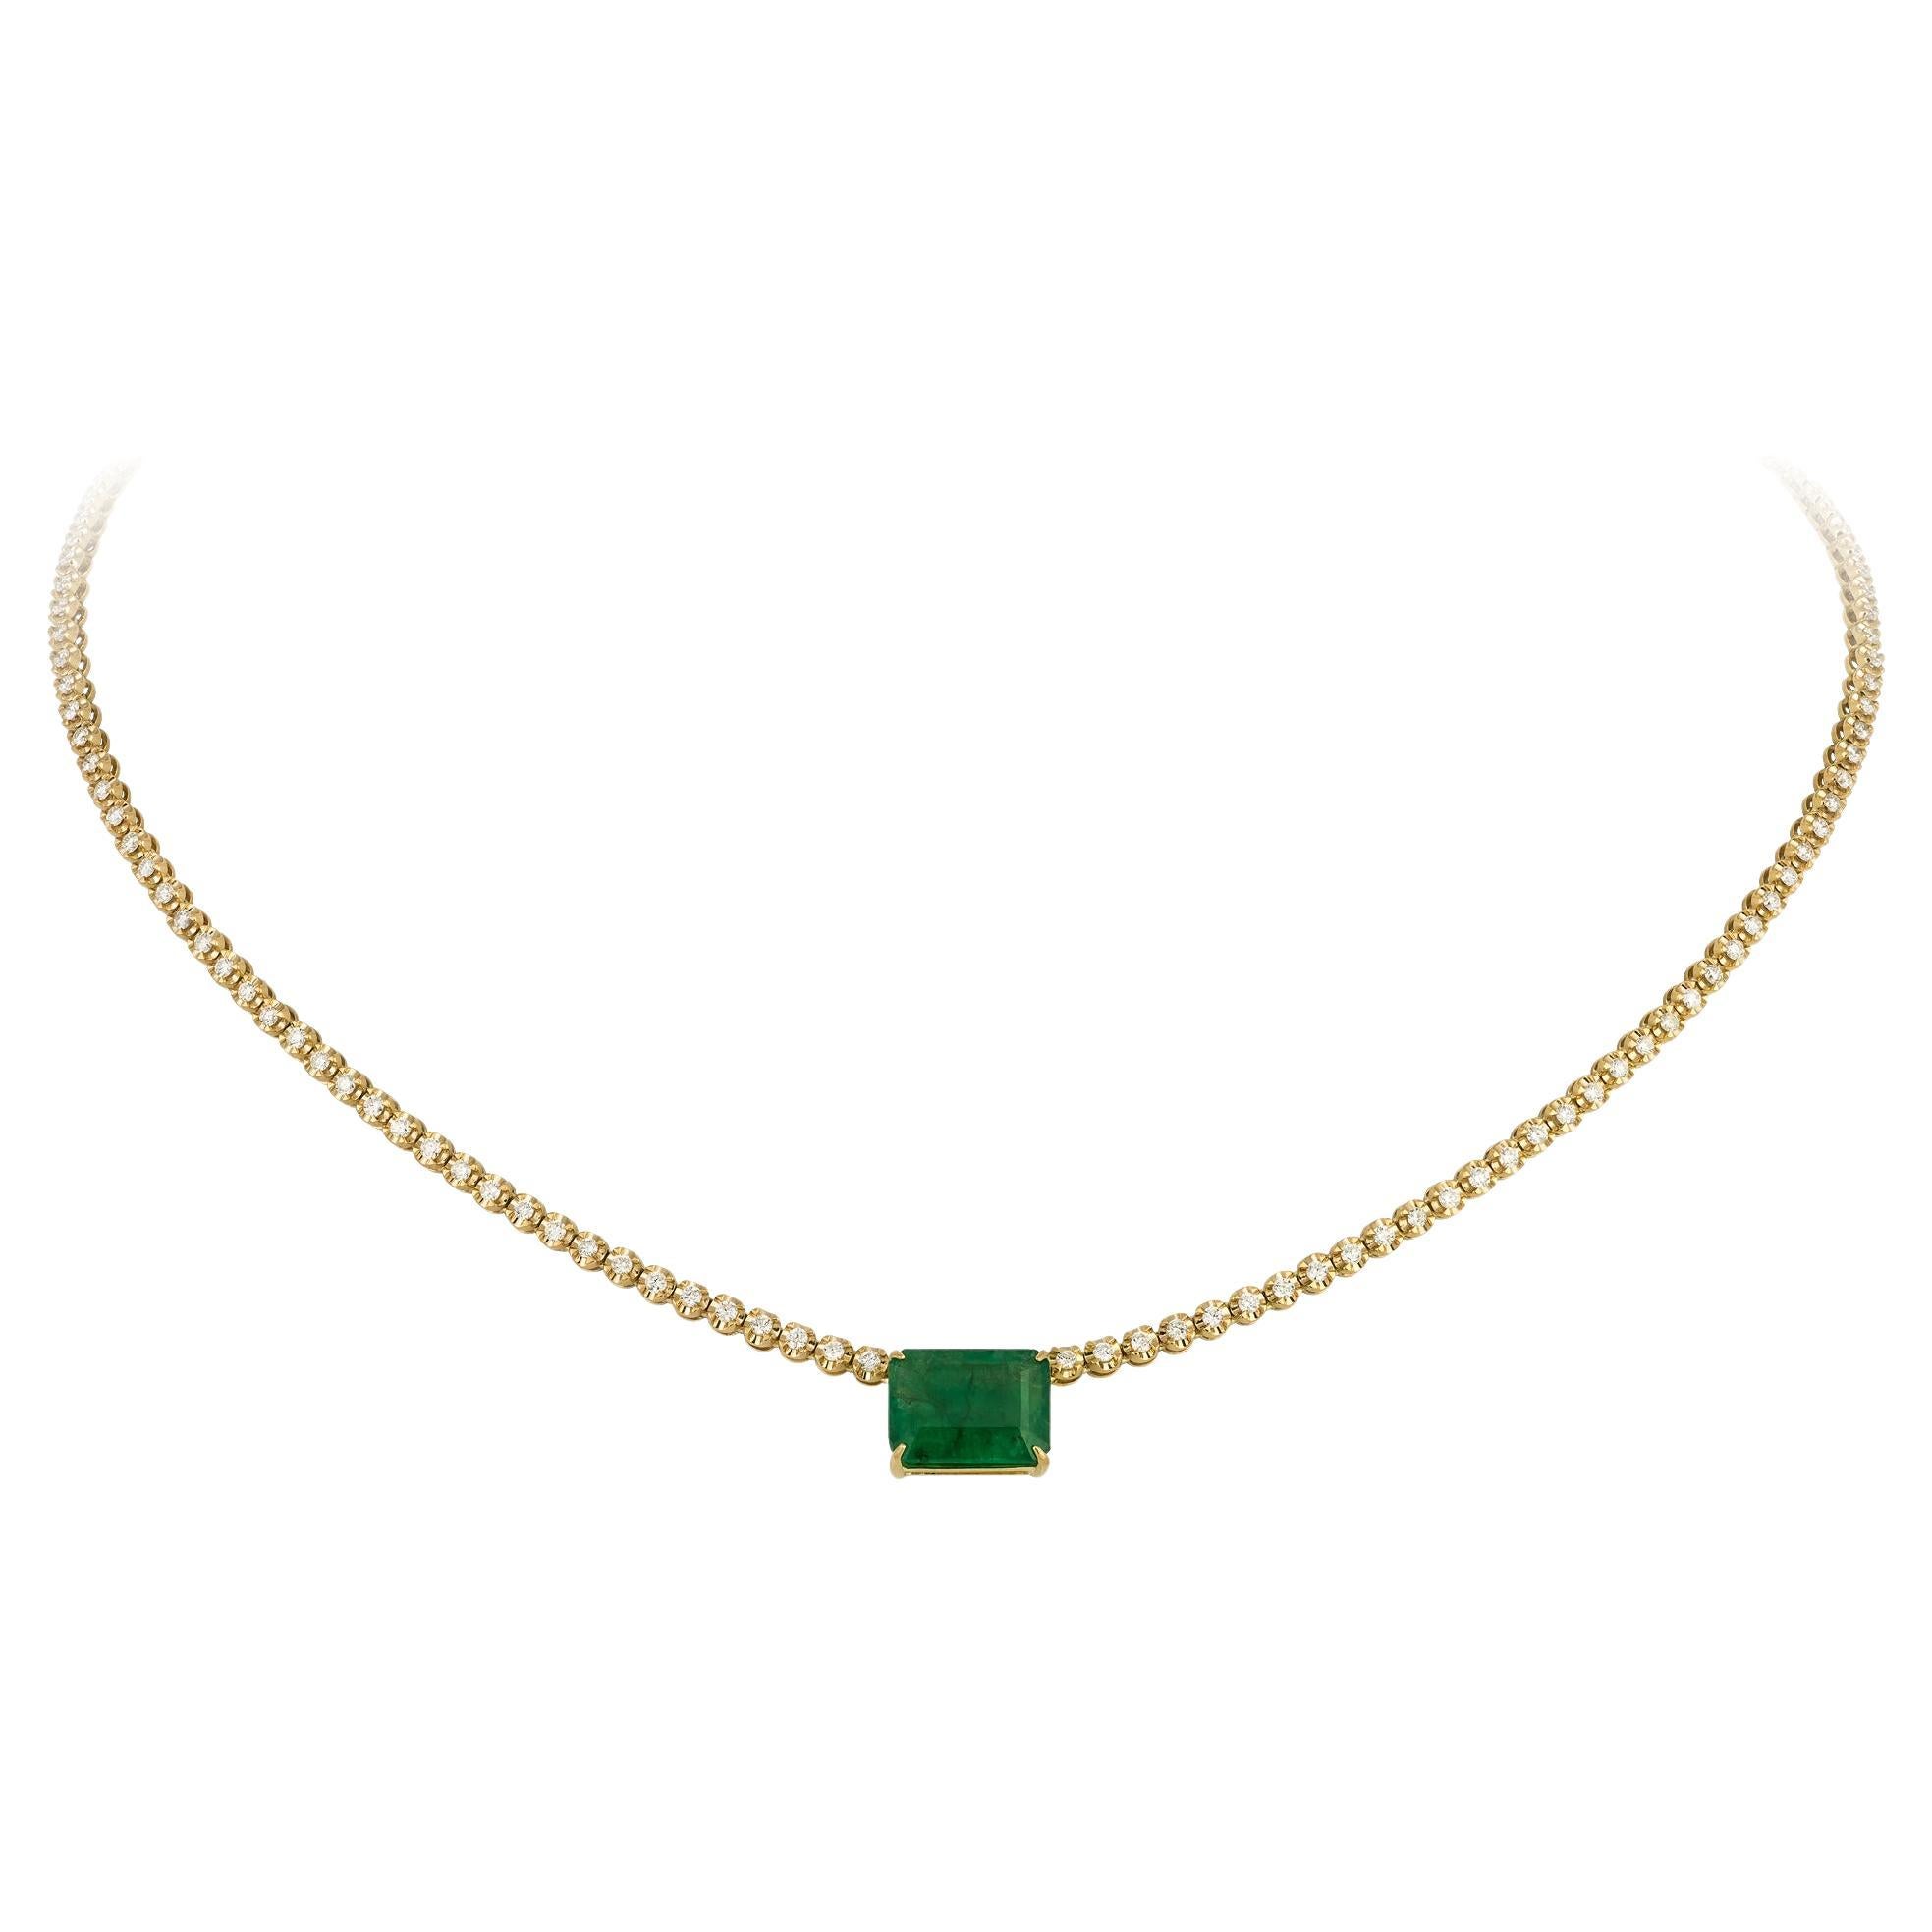 NWT 18KT Gold $15, 000 Glittering Fancy 5CT Green Emerald Diamond Necklace For Sale